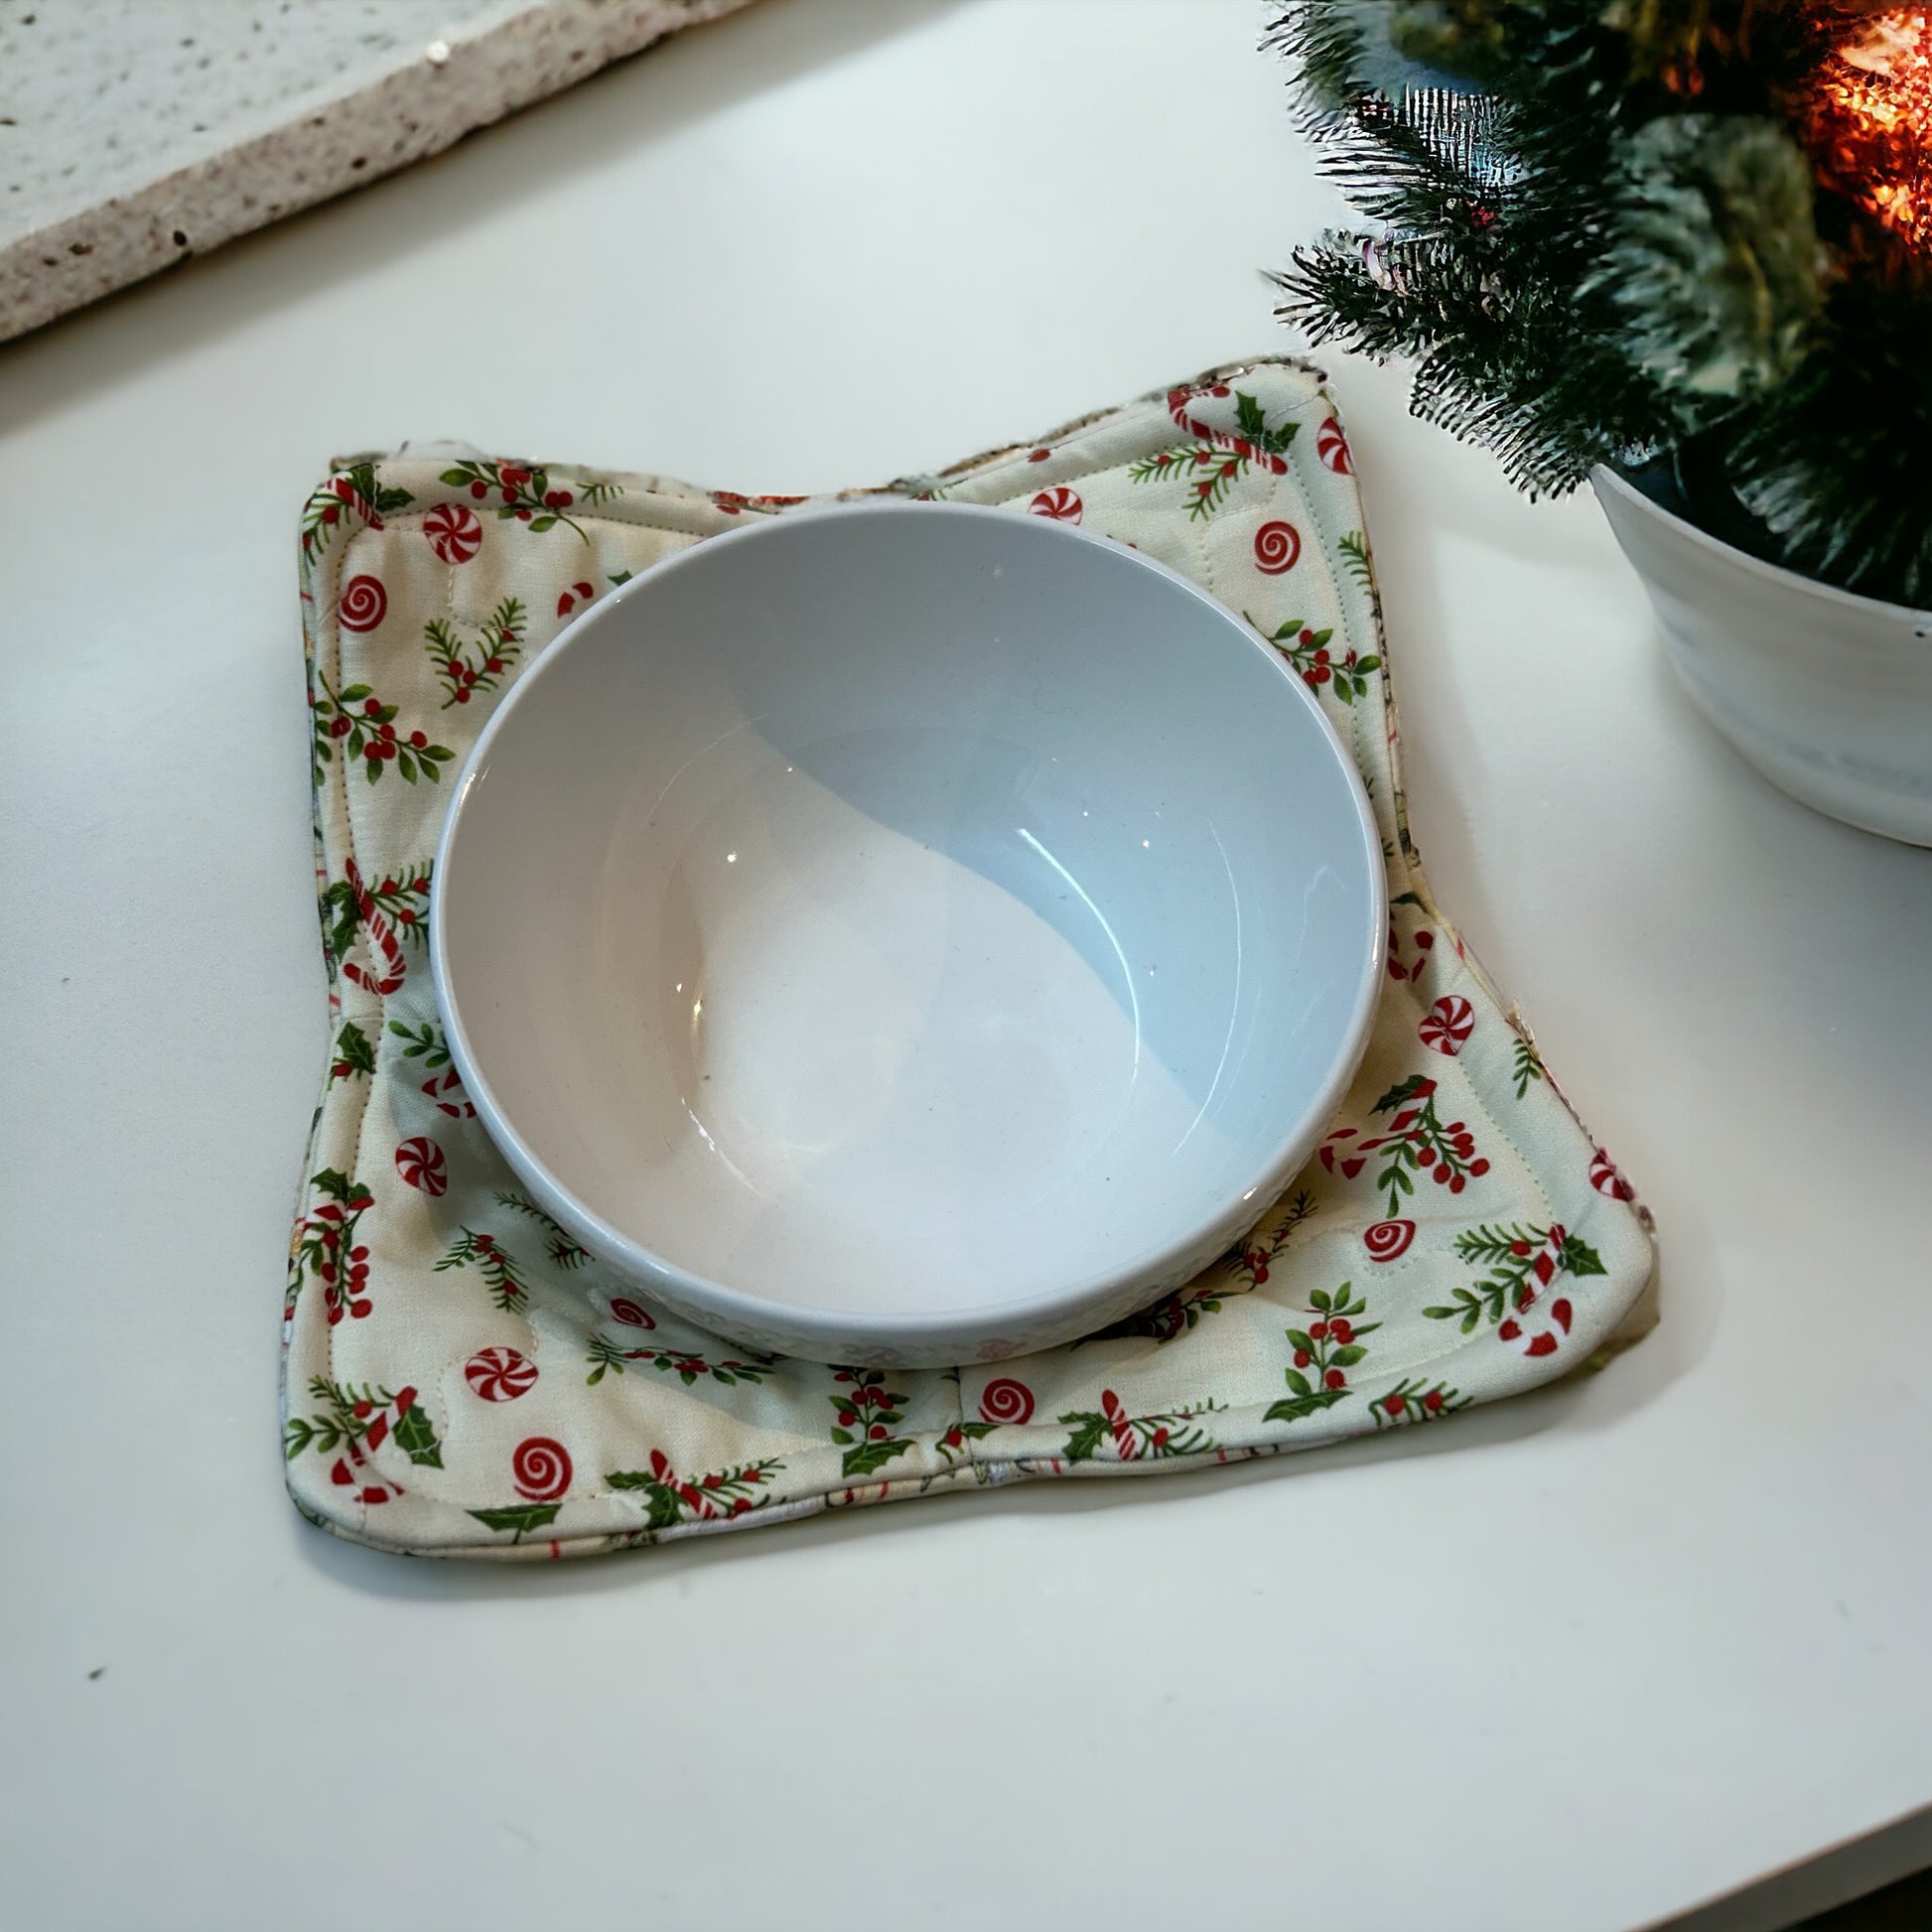 Soup bowl cozy for microwave made with 100% cotton fabric. Featuring vintage Santa and Snowman print fabric and Pellon Wrap and Zap batting. Sewn with cotton thread this Soup Bowl Hug can be used in the Microwave.